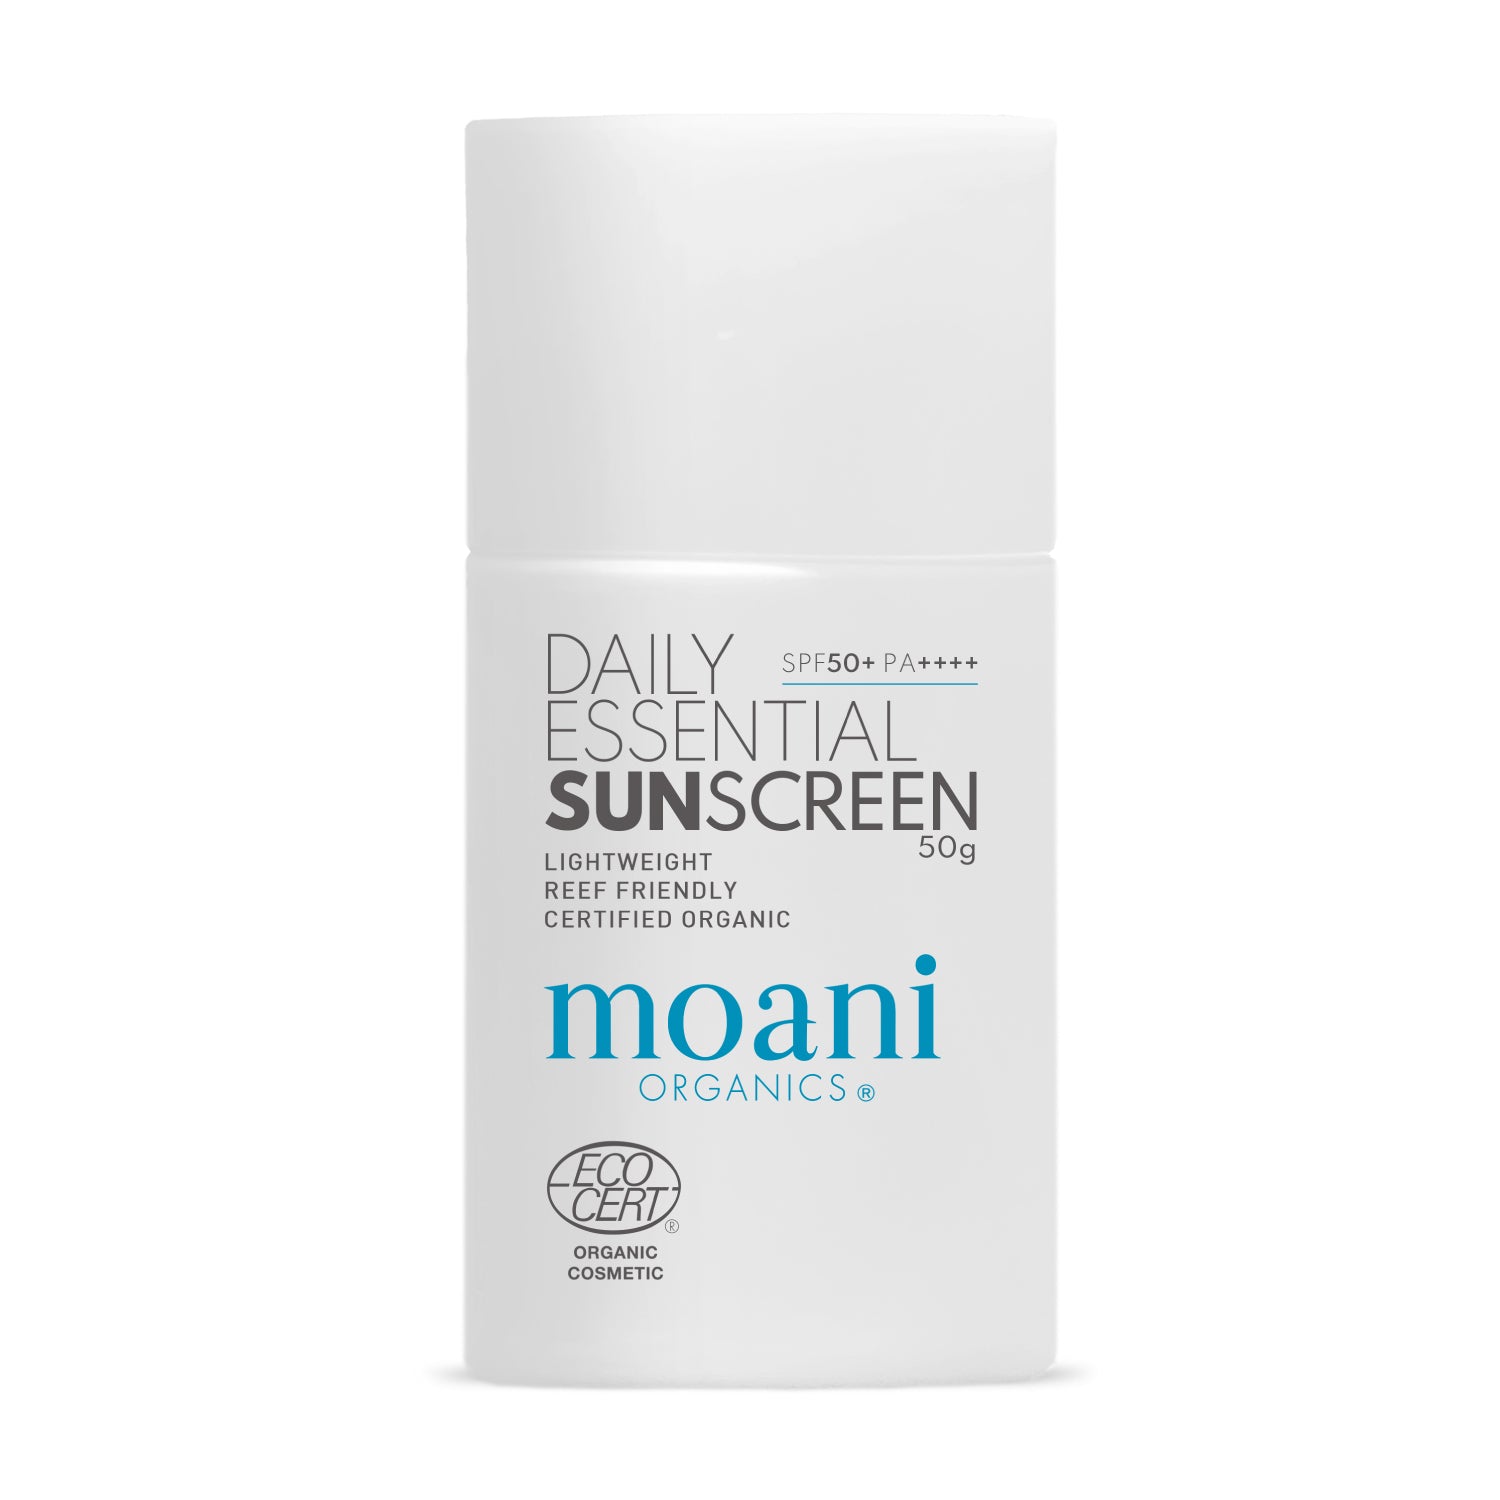 DAILY ESSENTIAL SUNSCREEN